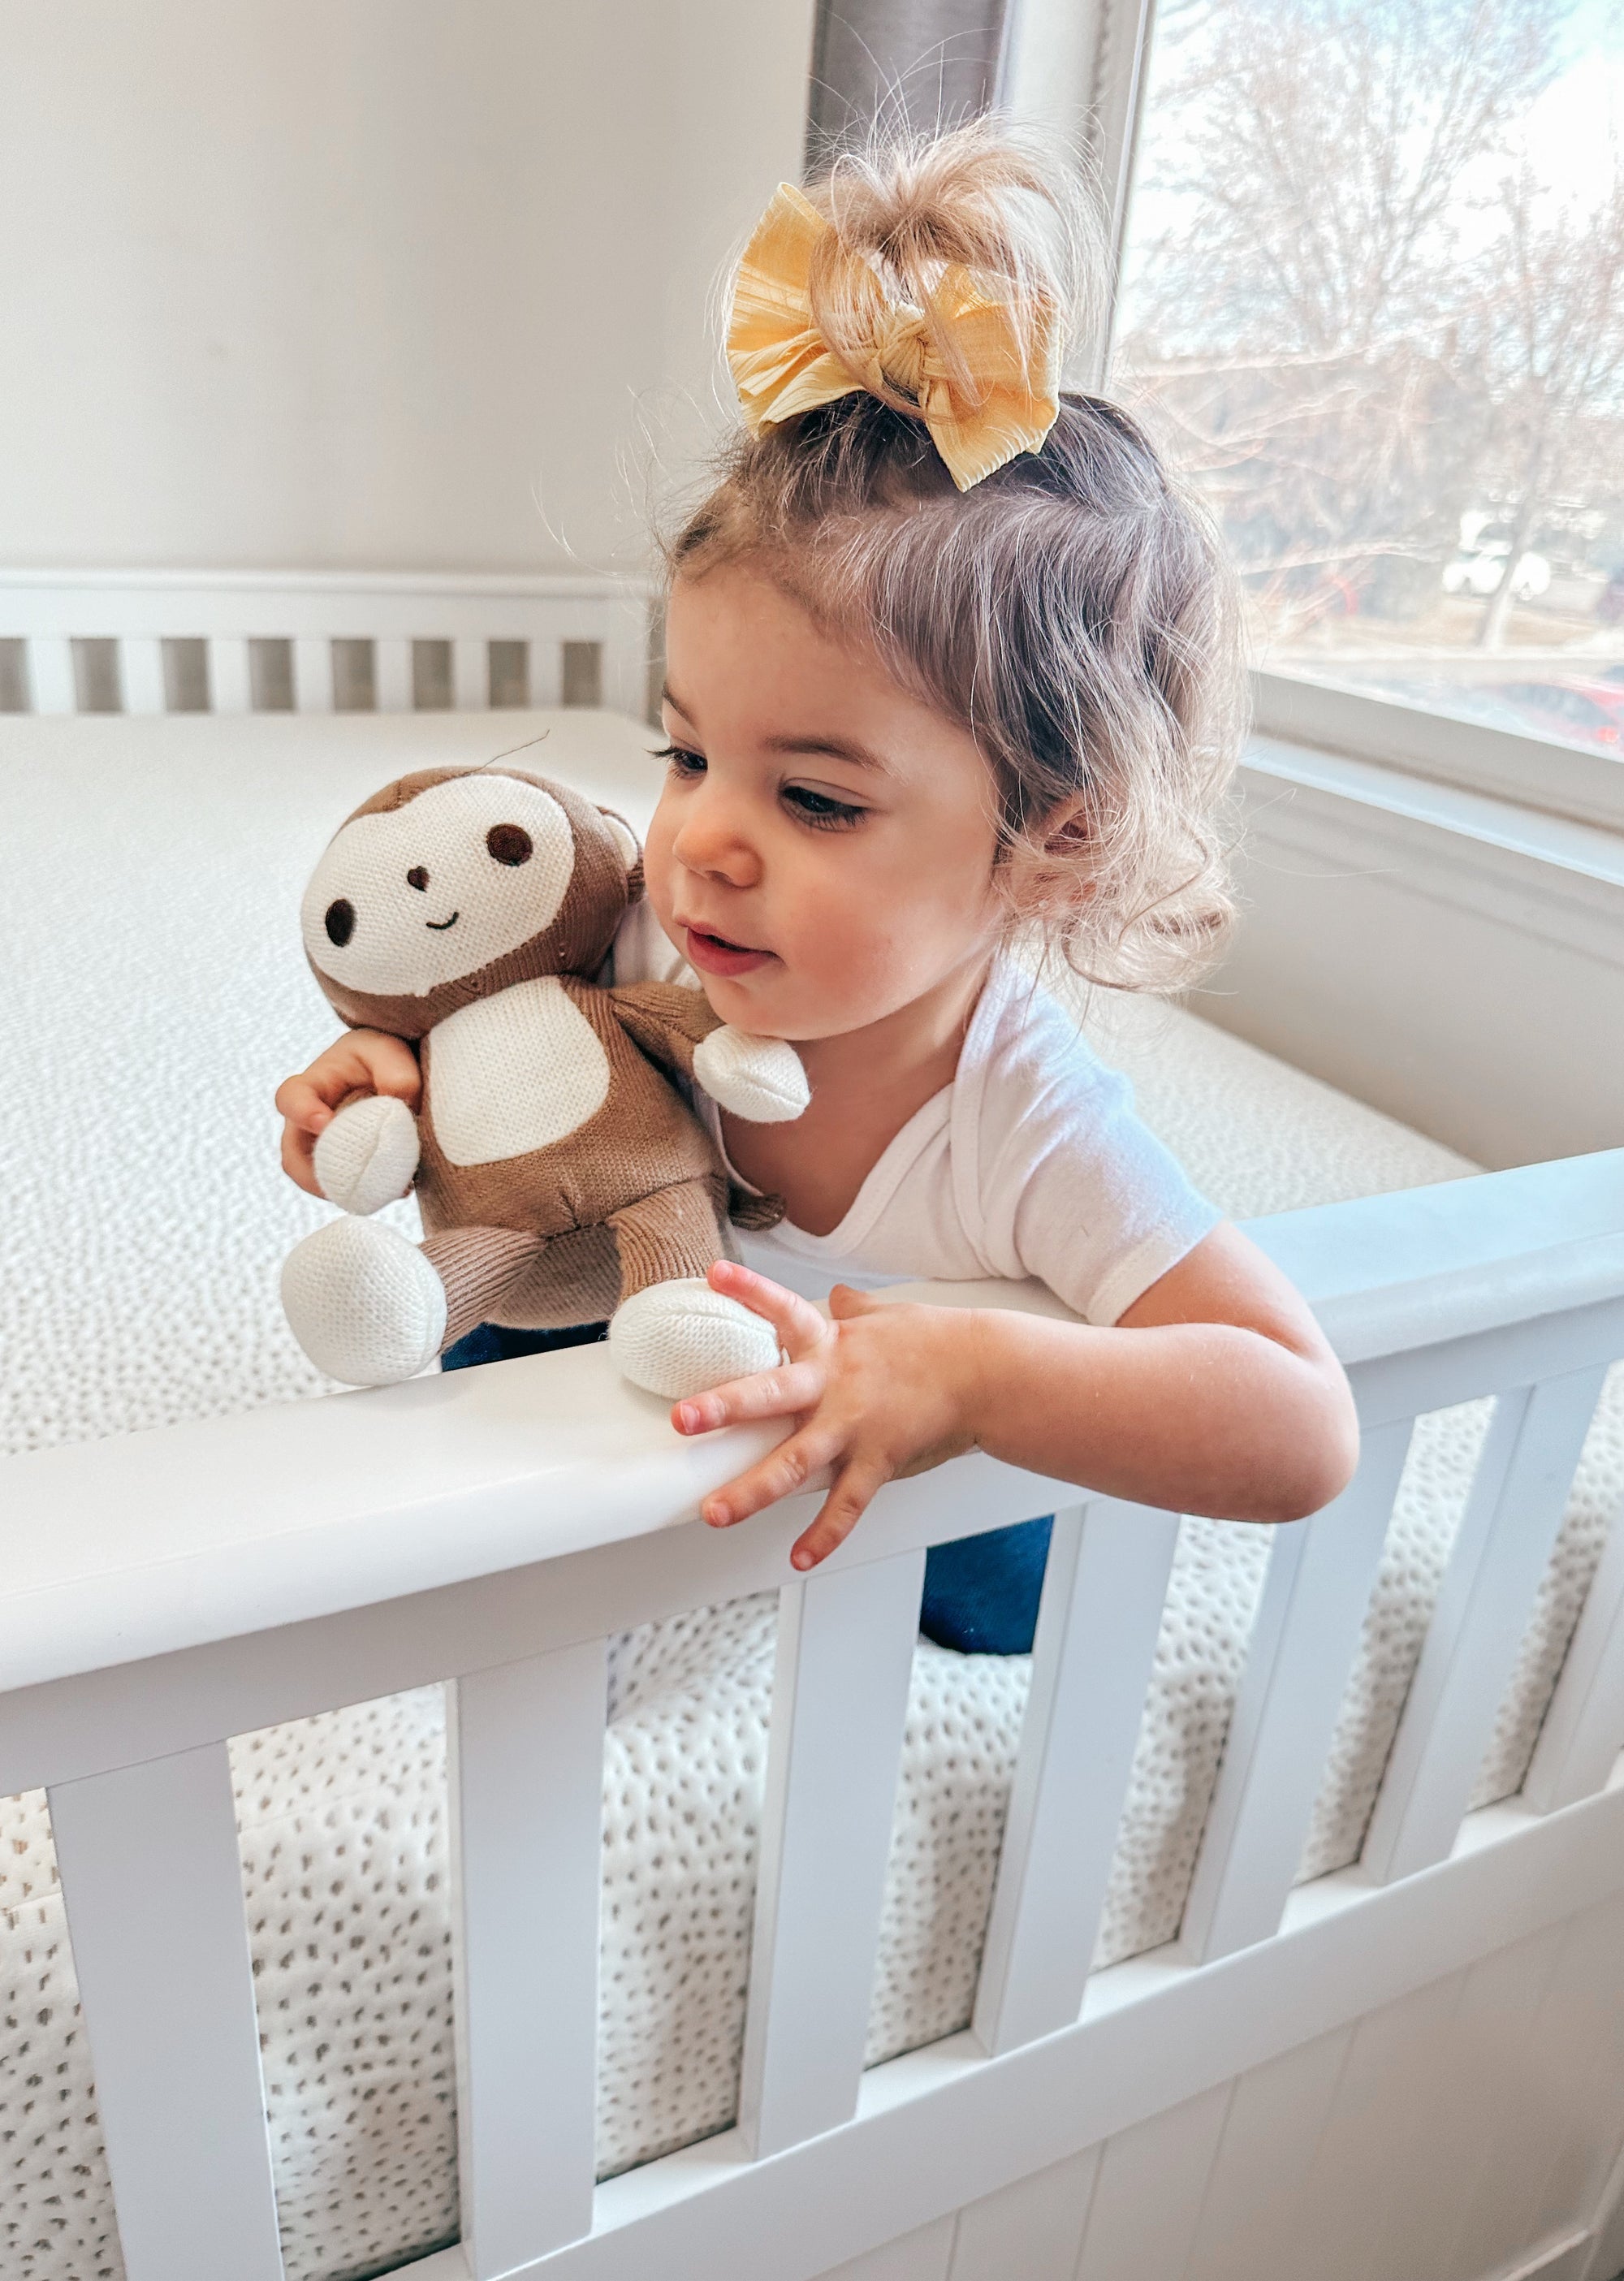 Smooth Transition: Moving Your Child from Crib to Big Kid Bed